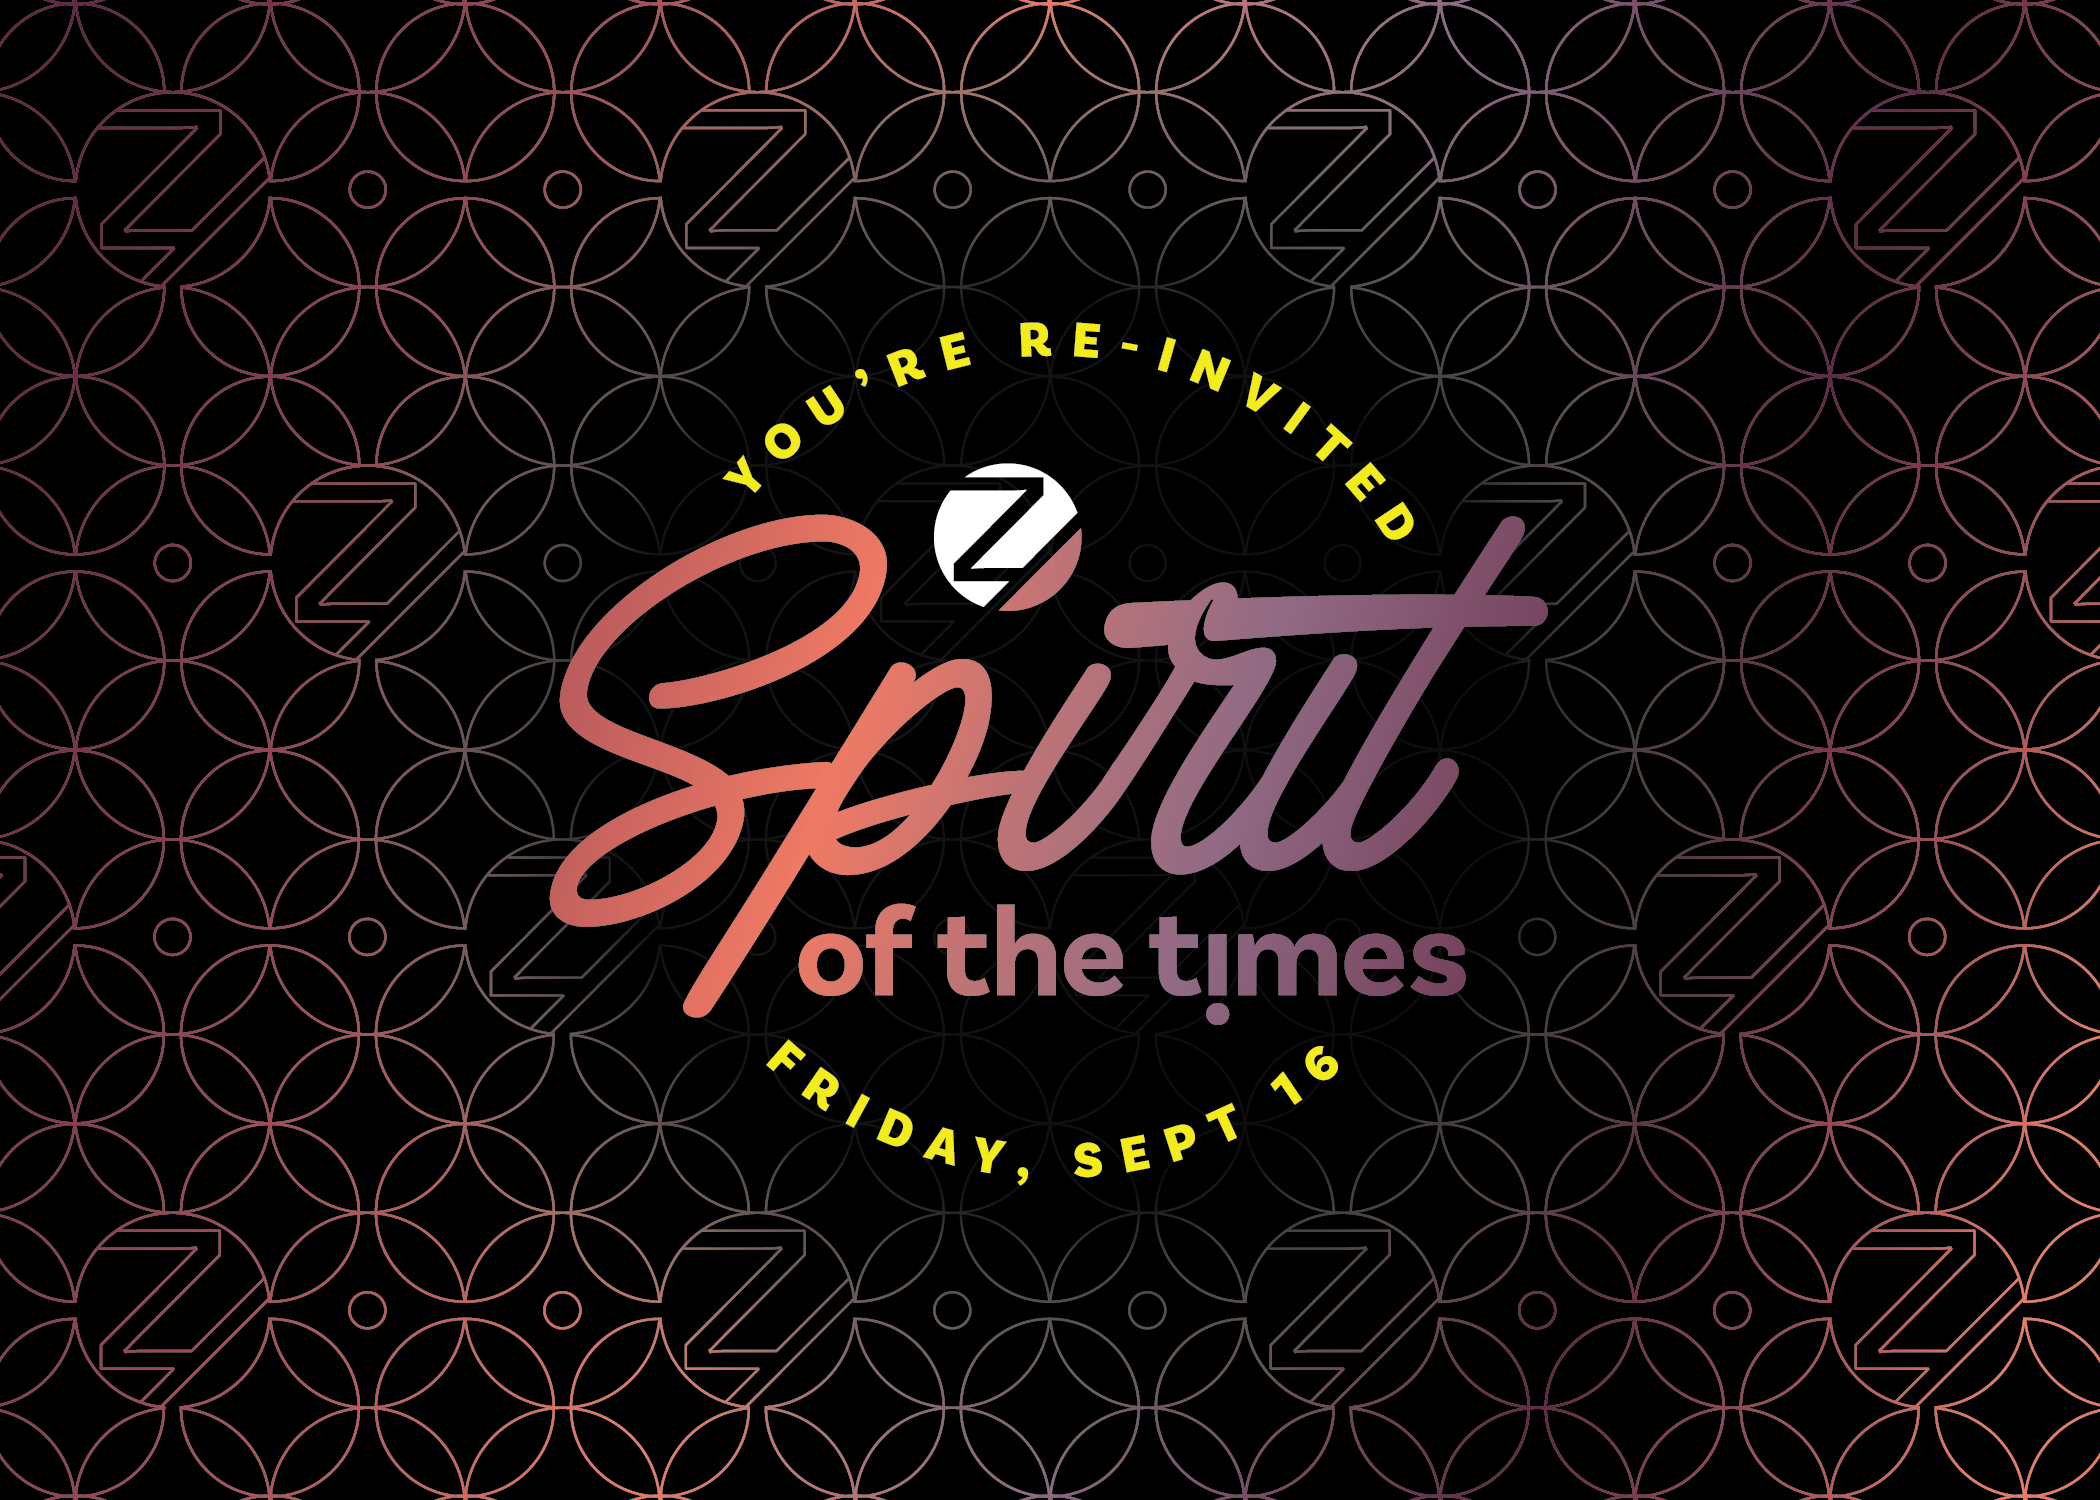 Spirit of the times event